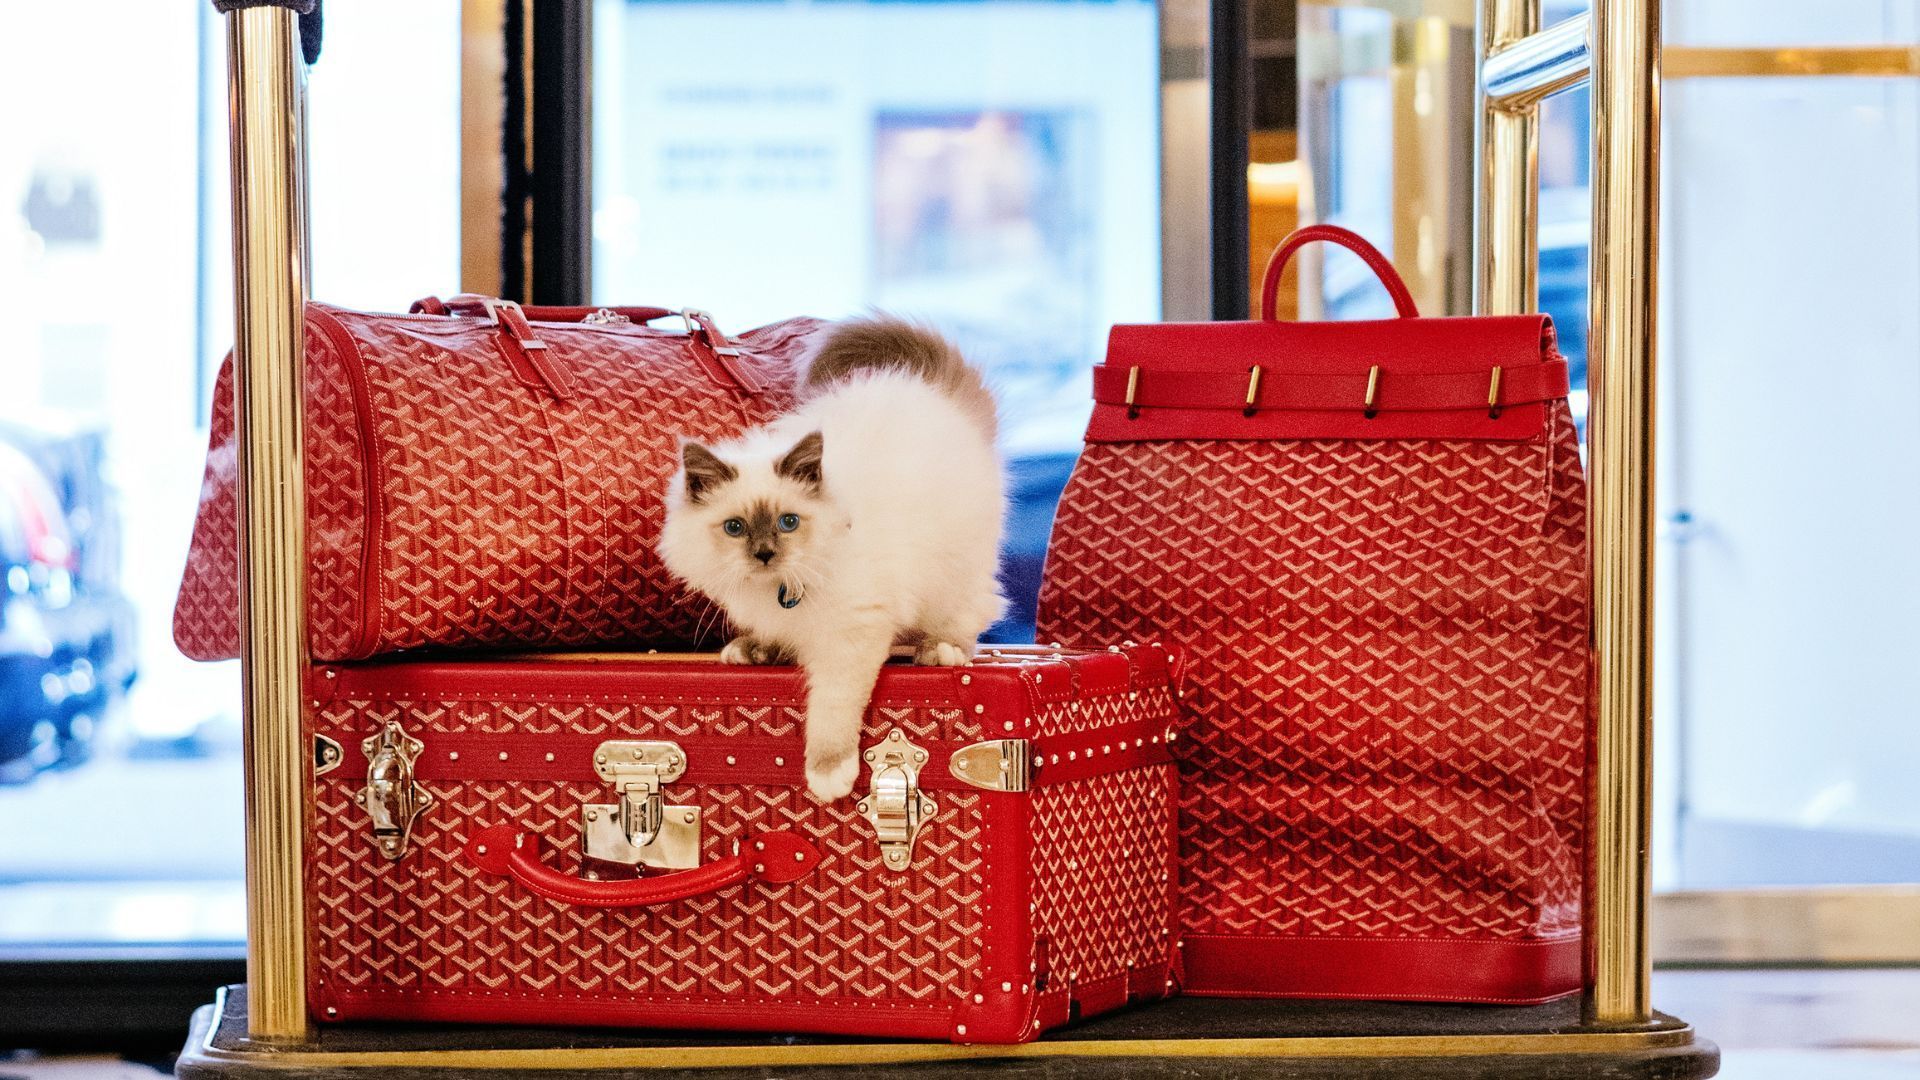 Louis Vuitton Just Introduced Their Most Adorable Ambassador Yet!